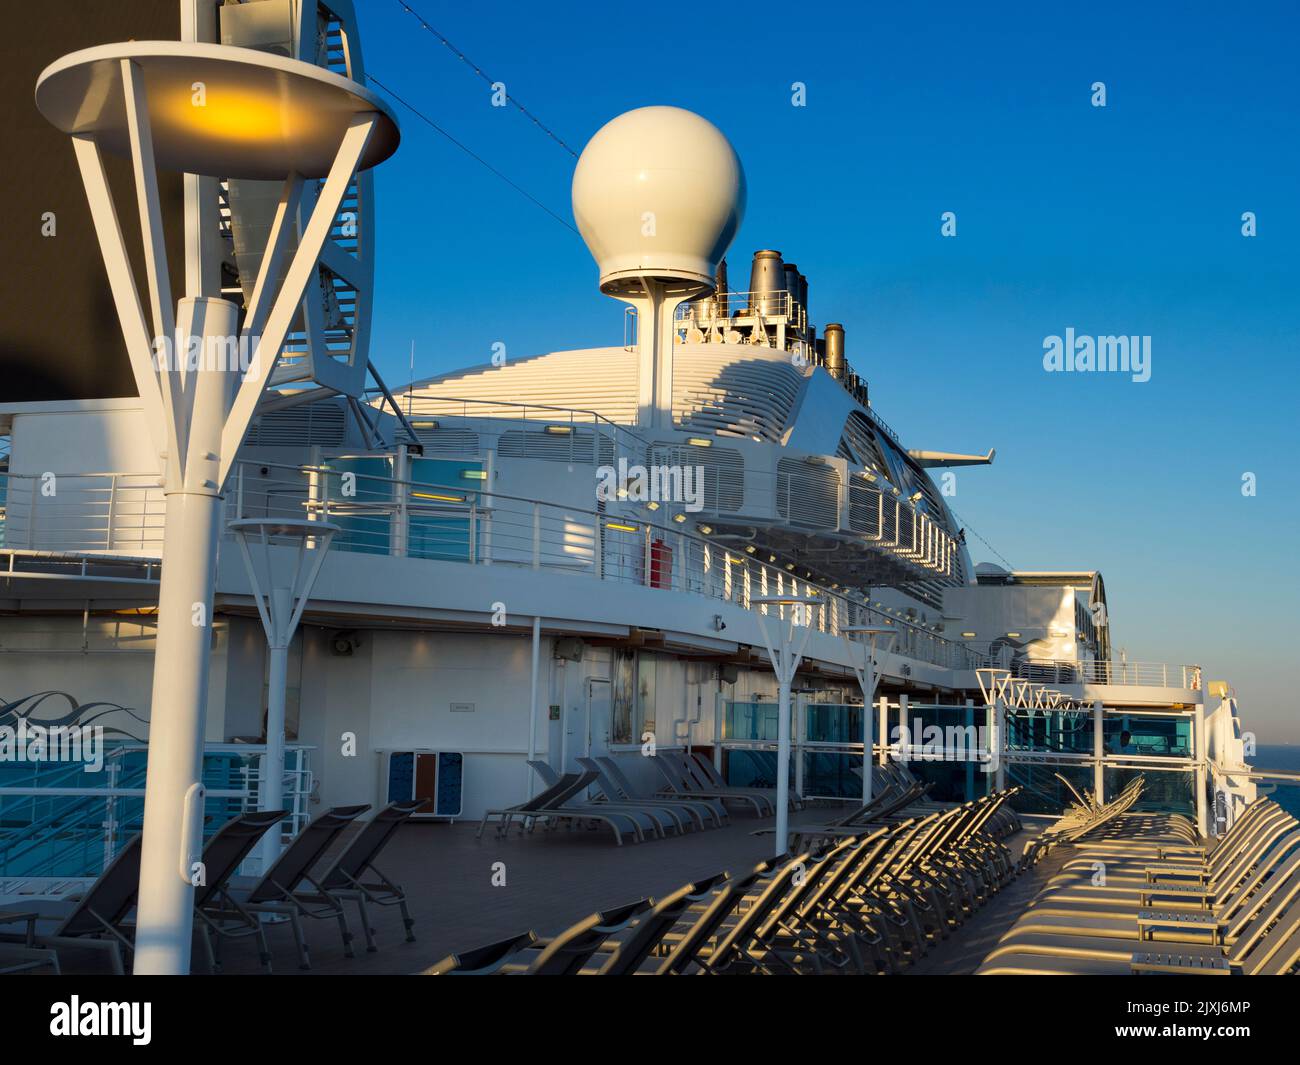 Looking up from the sun deck at the superstructure of a cruise ship in the North Sea, headed towards Rotterdam, the Netherlands Stock Photo